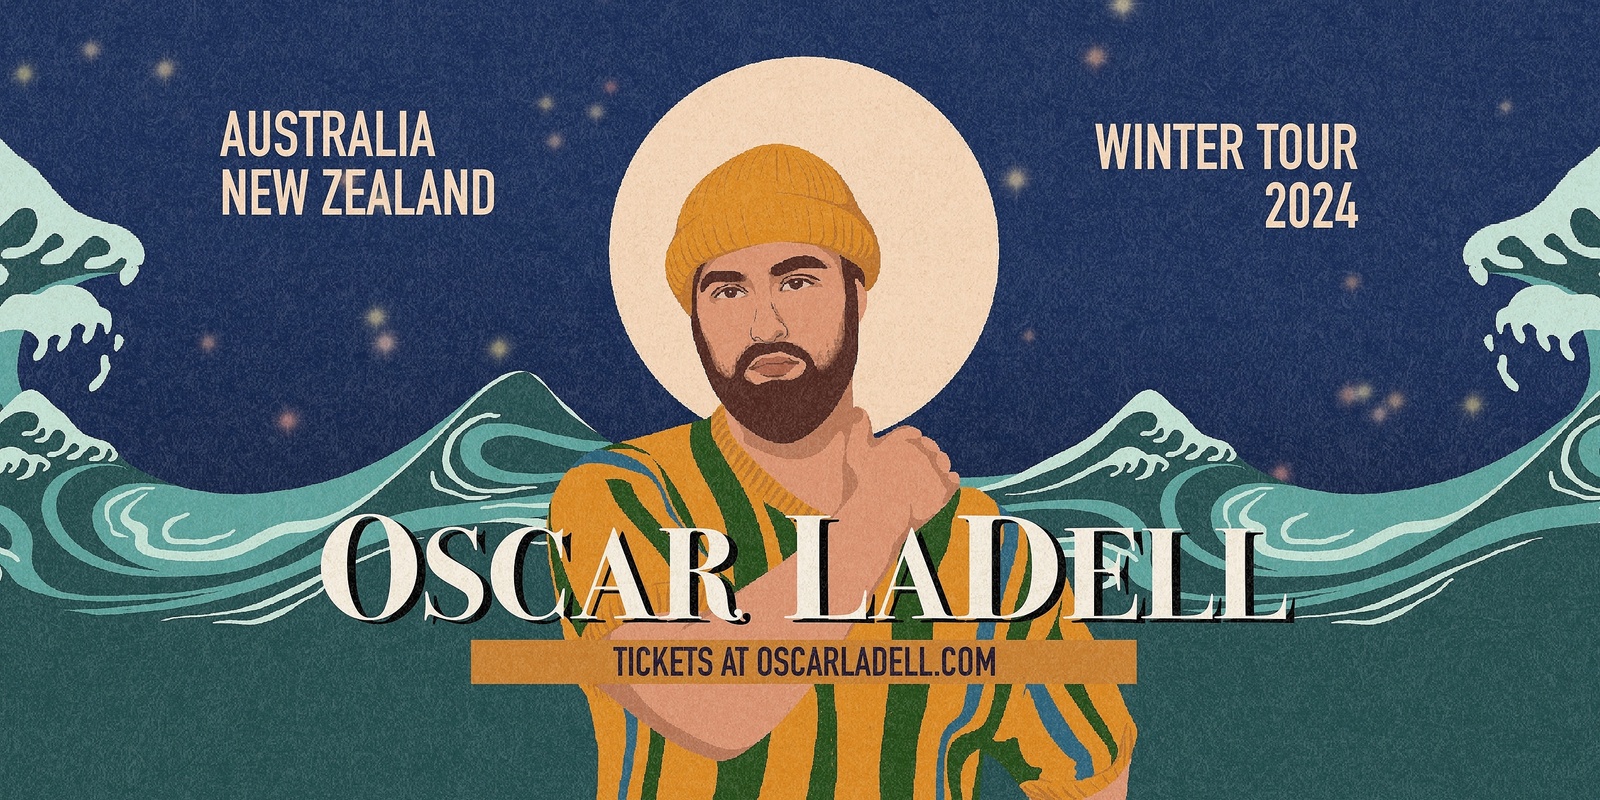 Banner image for Oscar LaDell Winter Tour 2024